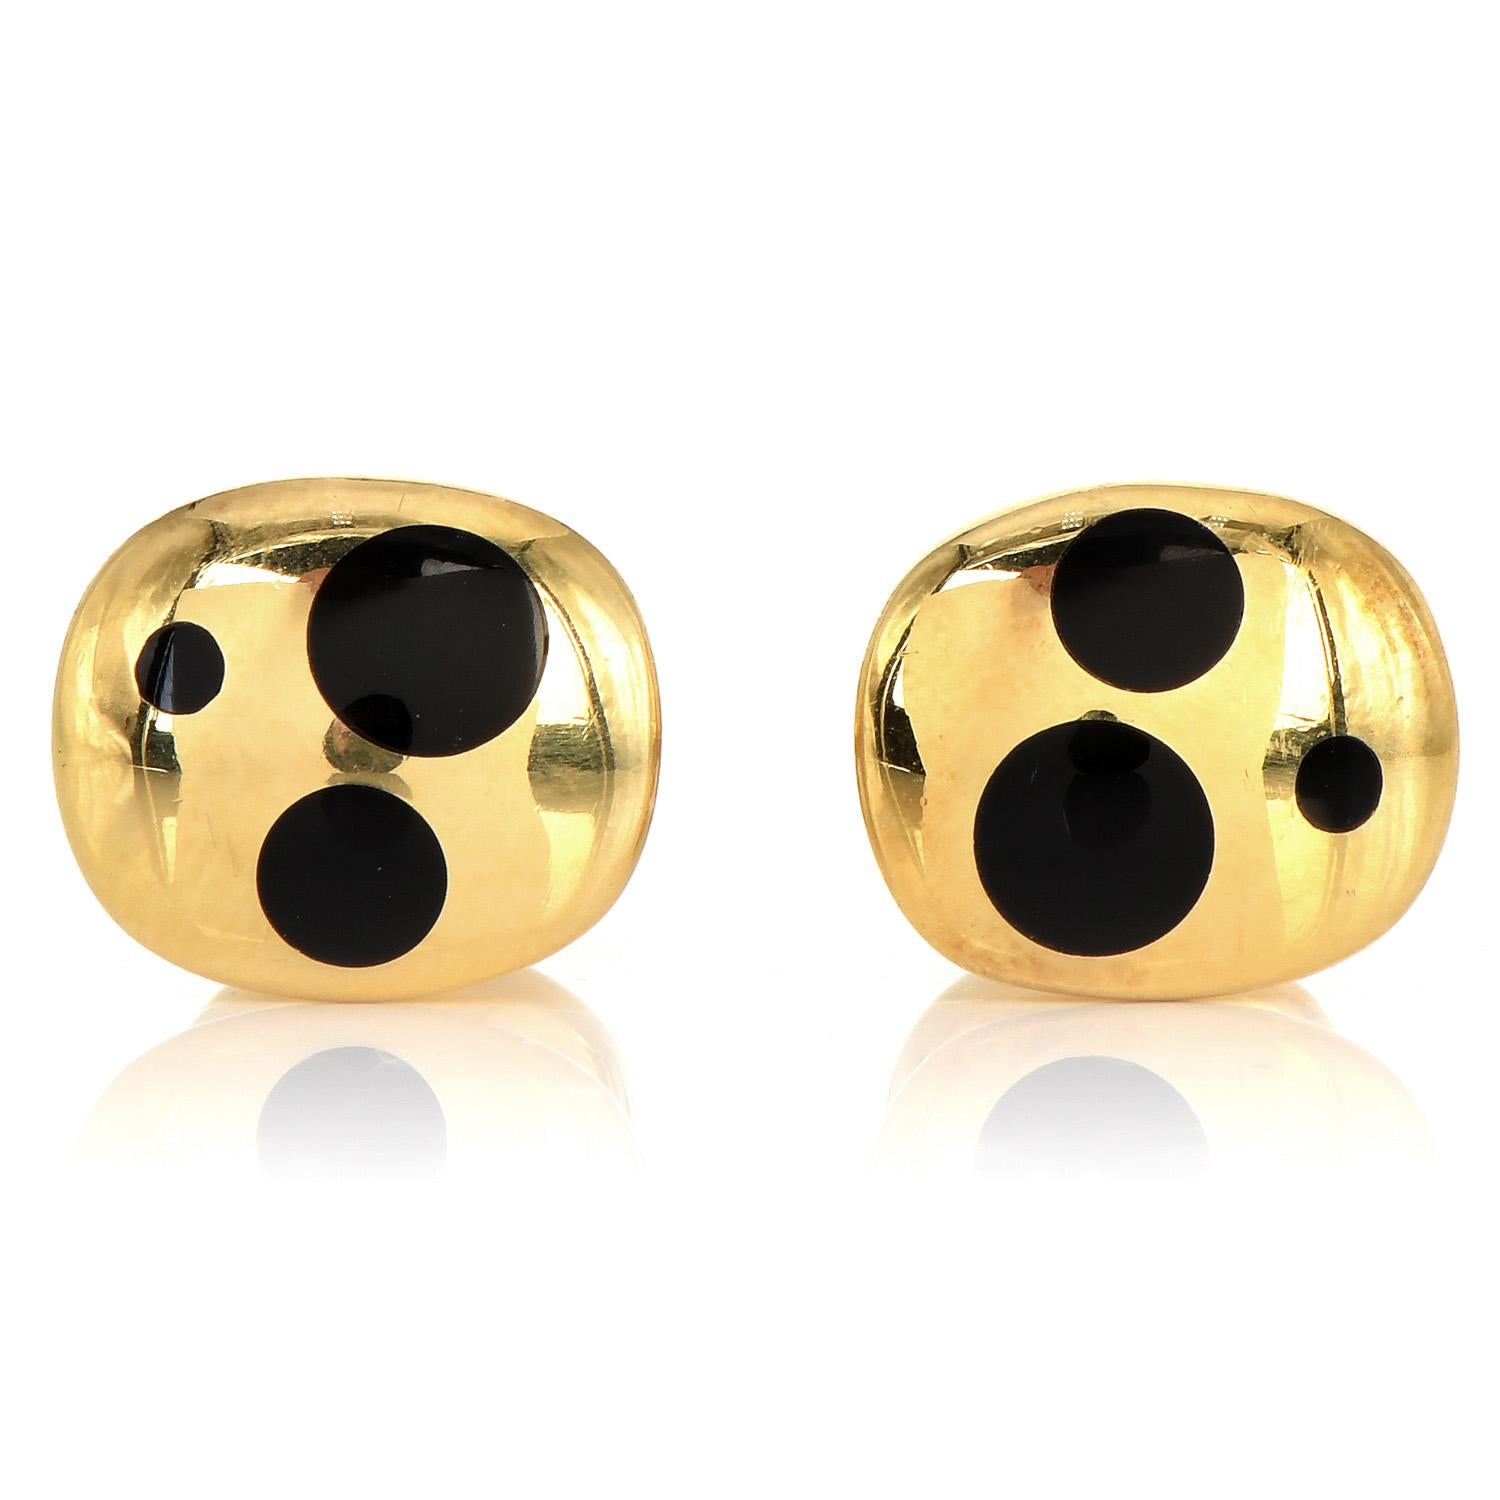 Bright and dazzling highly polished men's cufflinks, with a modern three-black dotted style. 

Crafted in solid 18K Yellow Gold,  composed of 6 round-cut, flush set, Black Onyx stones.

The complete piece measures approximately 15 mm x 12 mm, with a